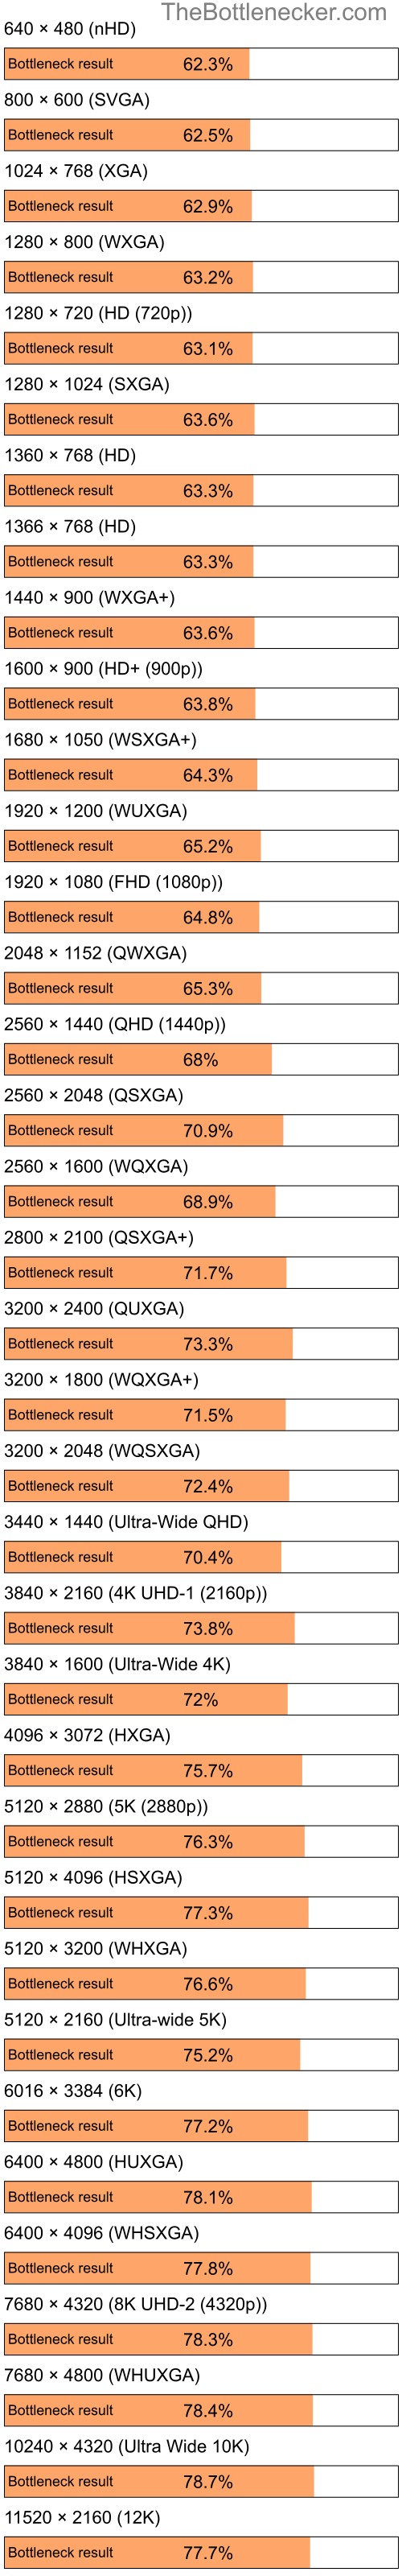 Bottleneck results by resolution for Intel Atom N280 and AMD Mobility Radeon X700 in Processor Intense Tasks